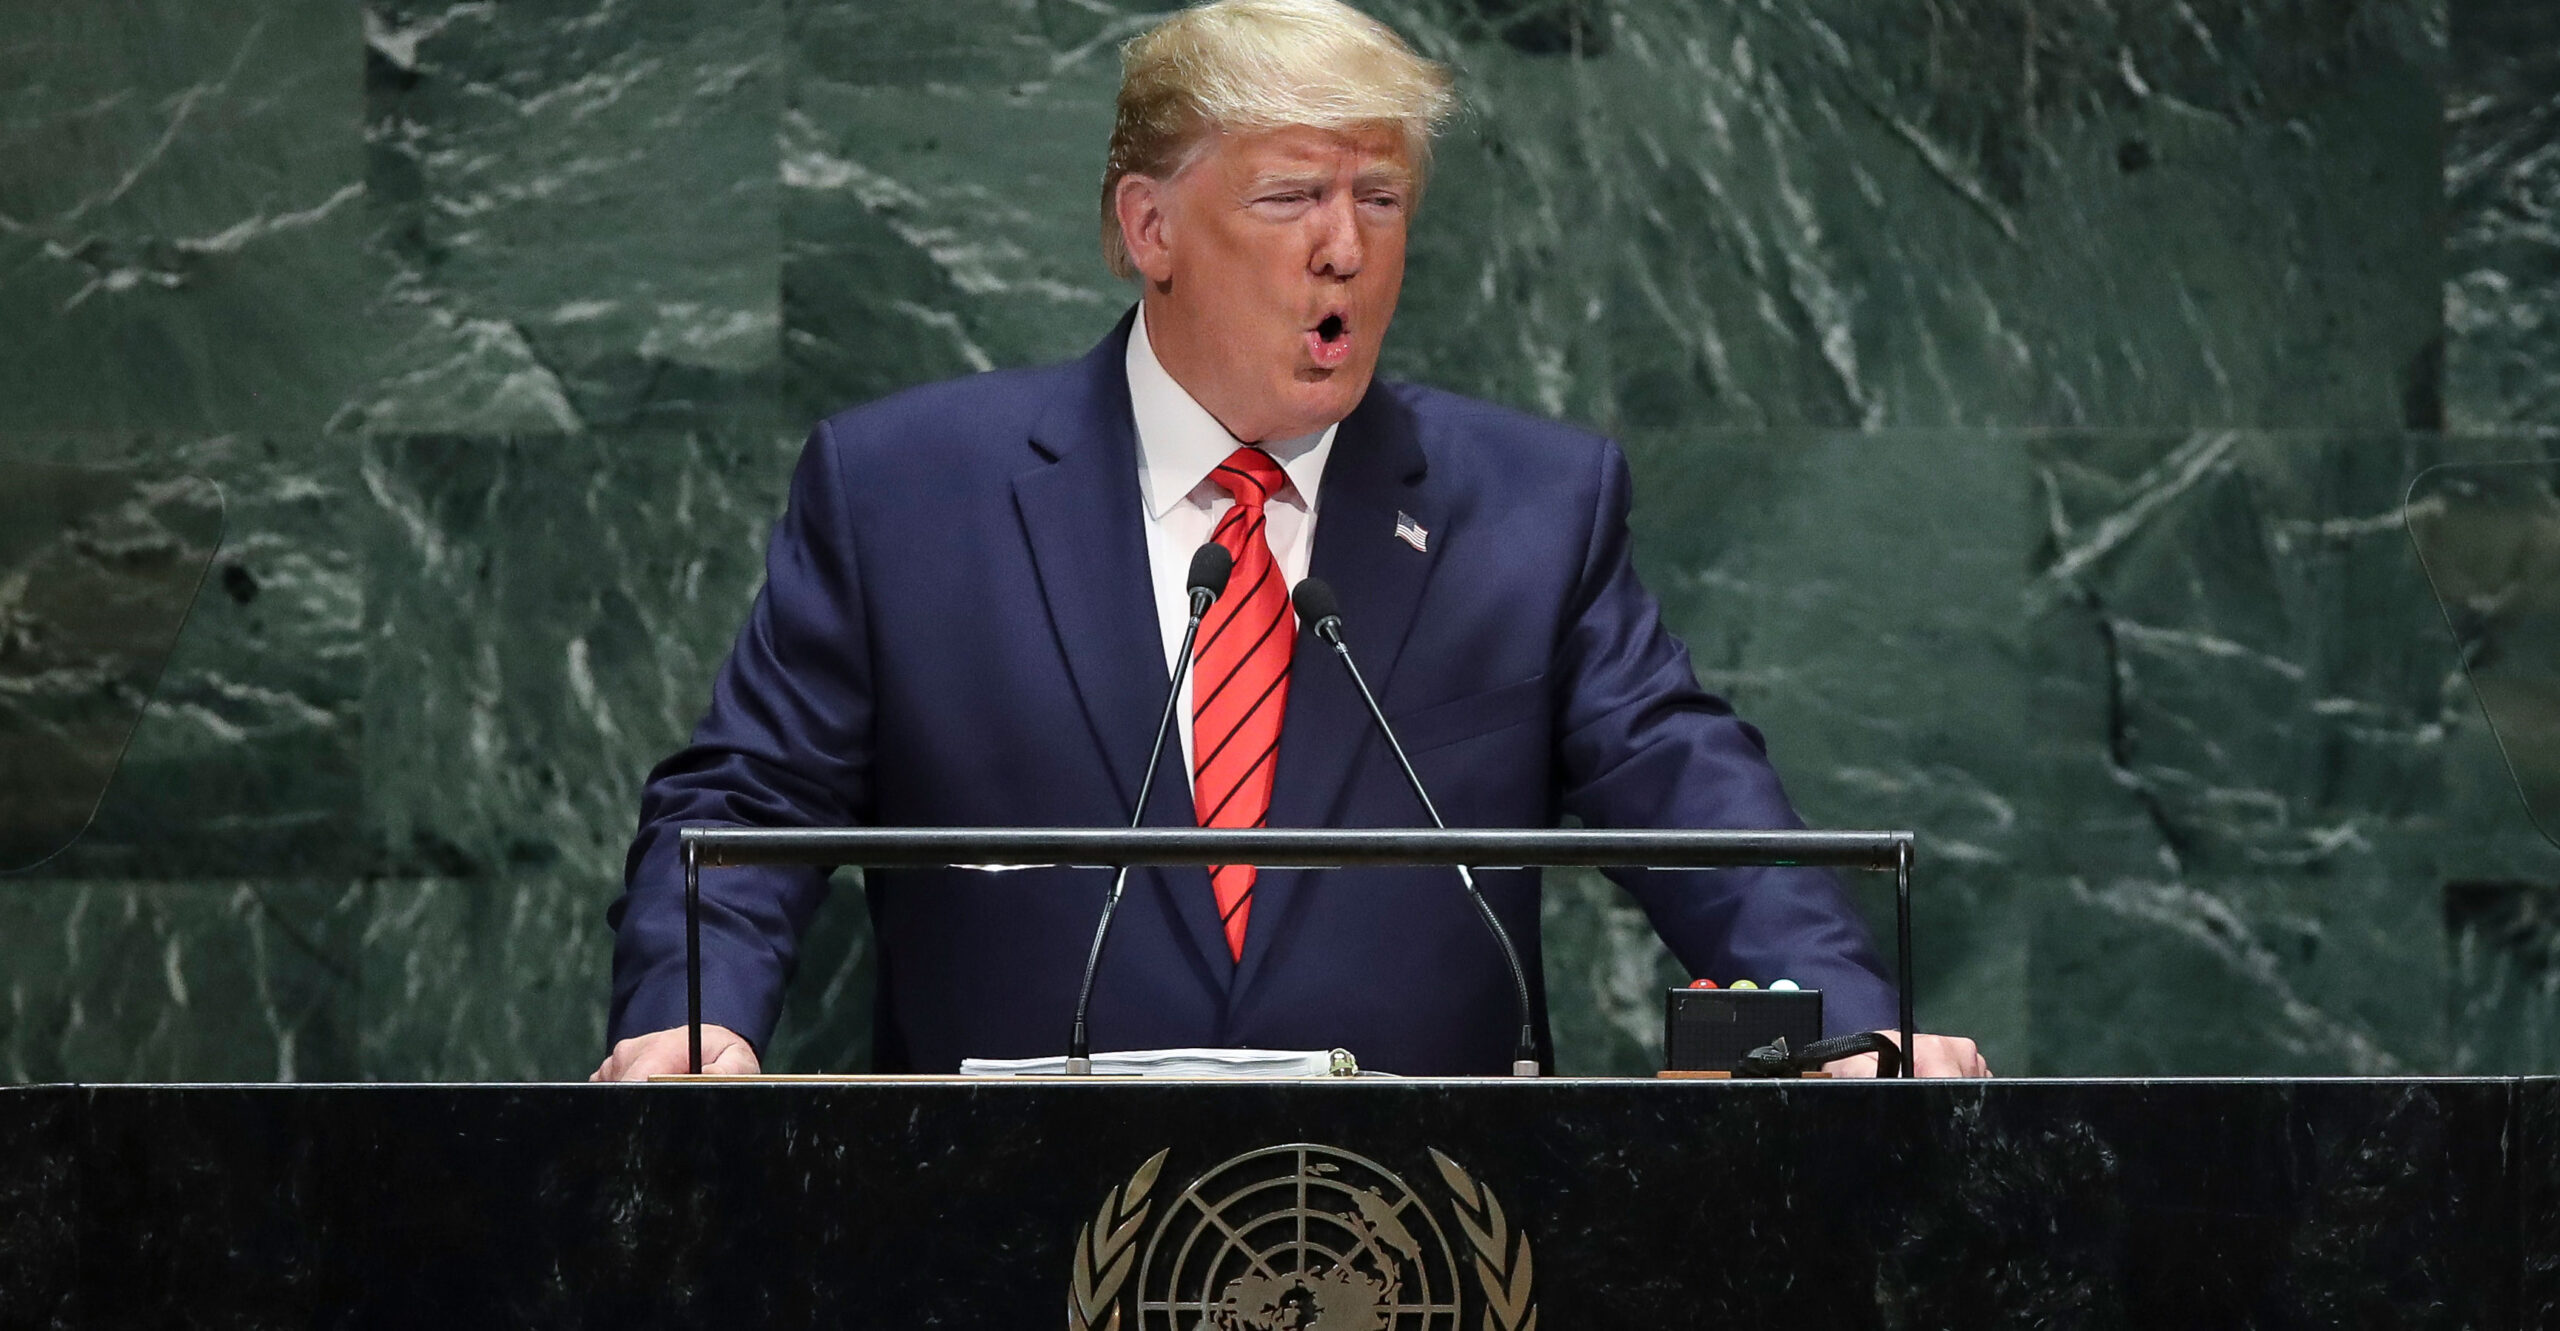 In UN Speech, Trump Highlights US Response to COVID-19, Faults China